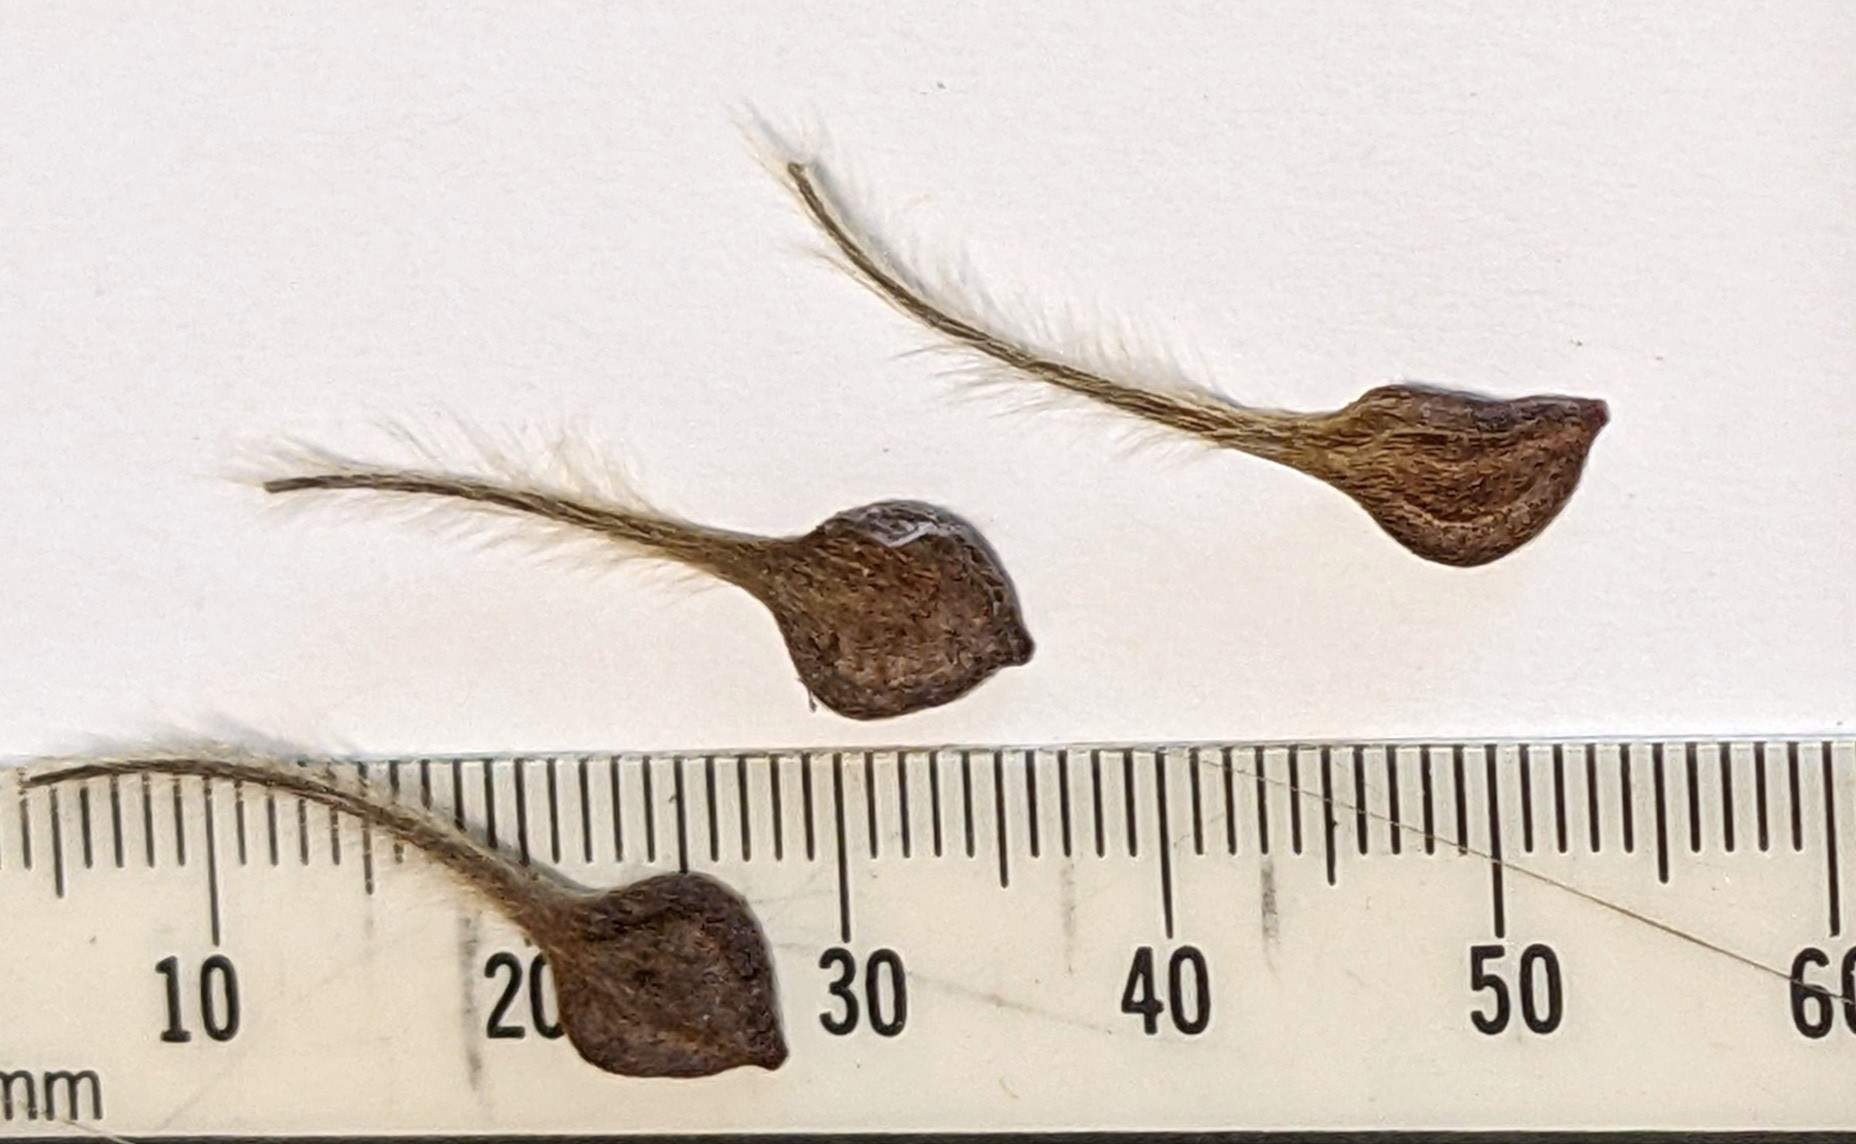 The Scientific Name is Clematis crispa [= Viorna crispa]. You will likely hear them called Swamp Leatherflower, Southern Leatherflower. This picture shows the The seeds (achenes), are attached to feathery stalks. of Clematis crispa [= Viorna crispa]